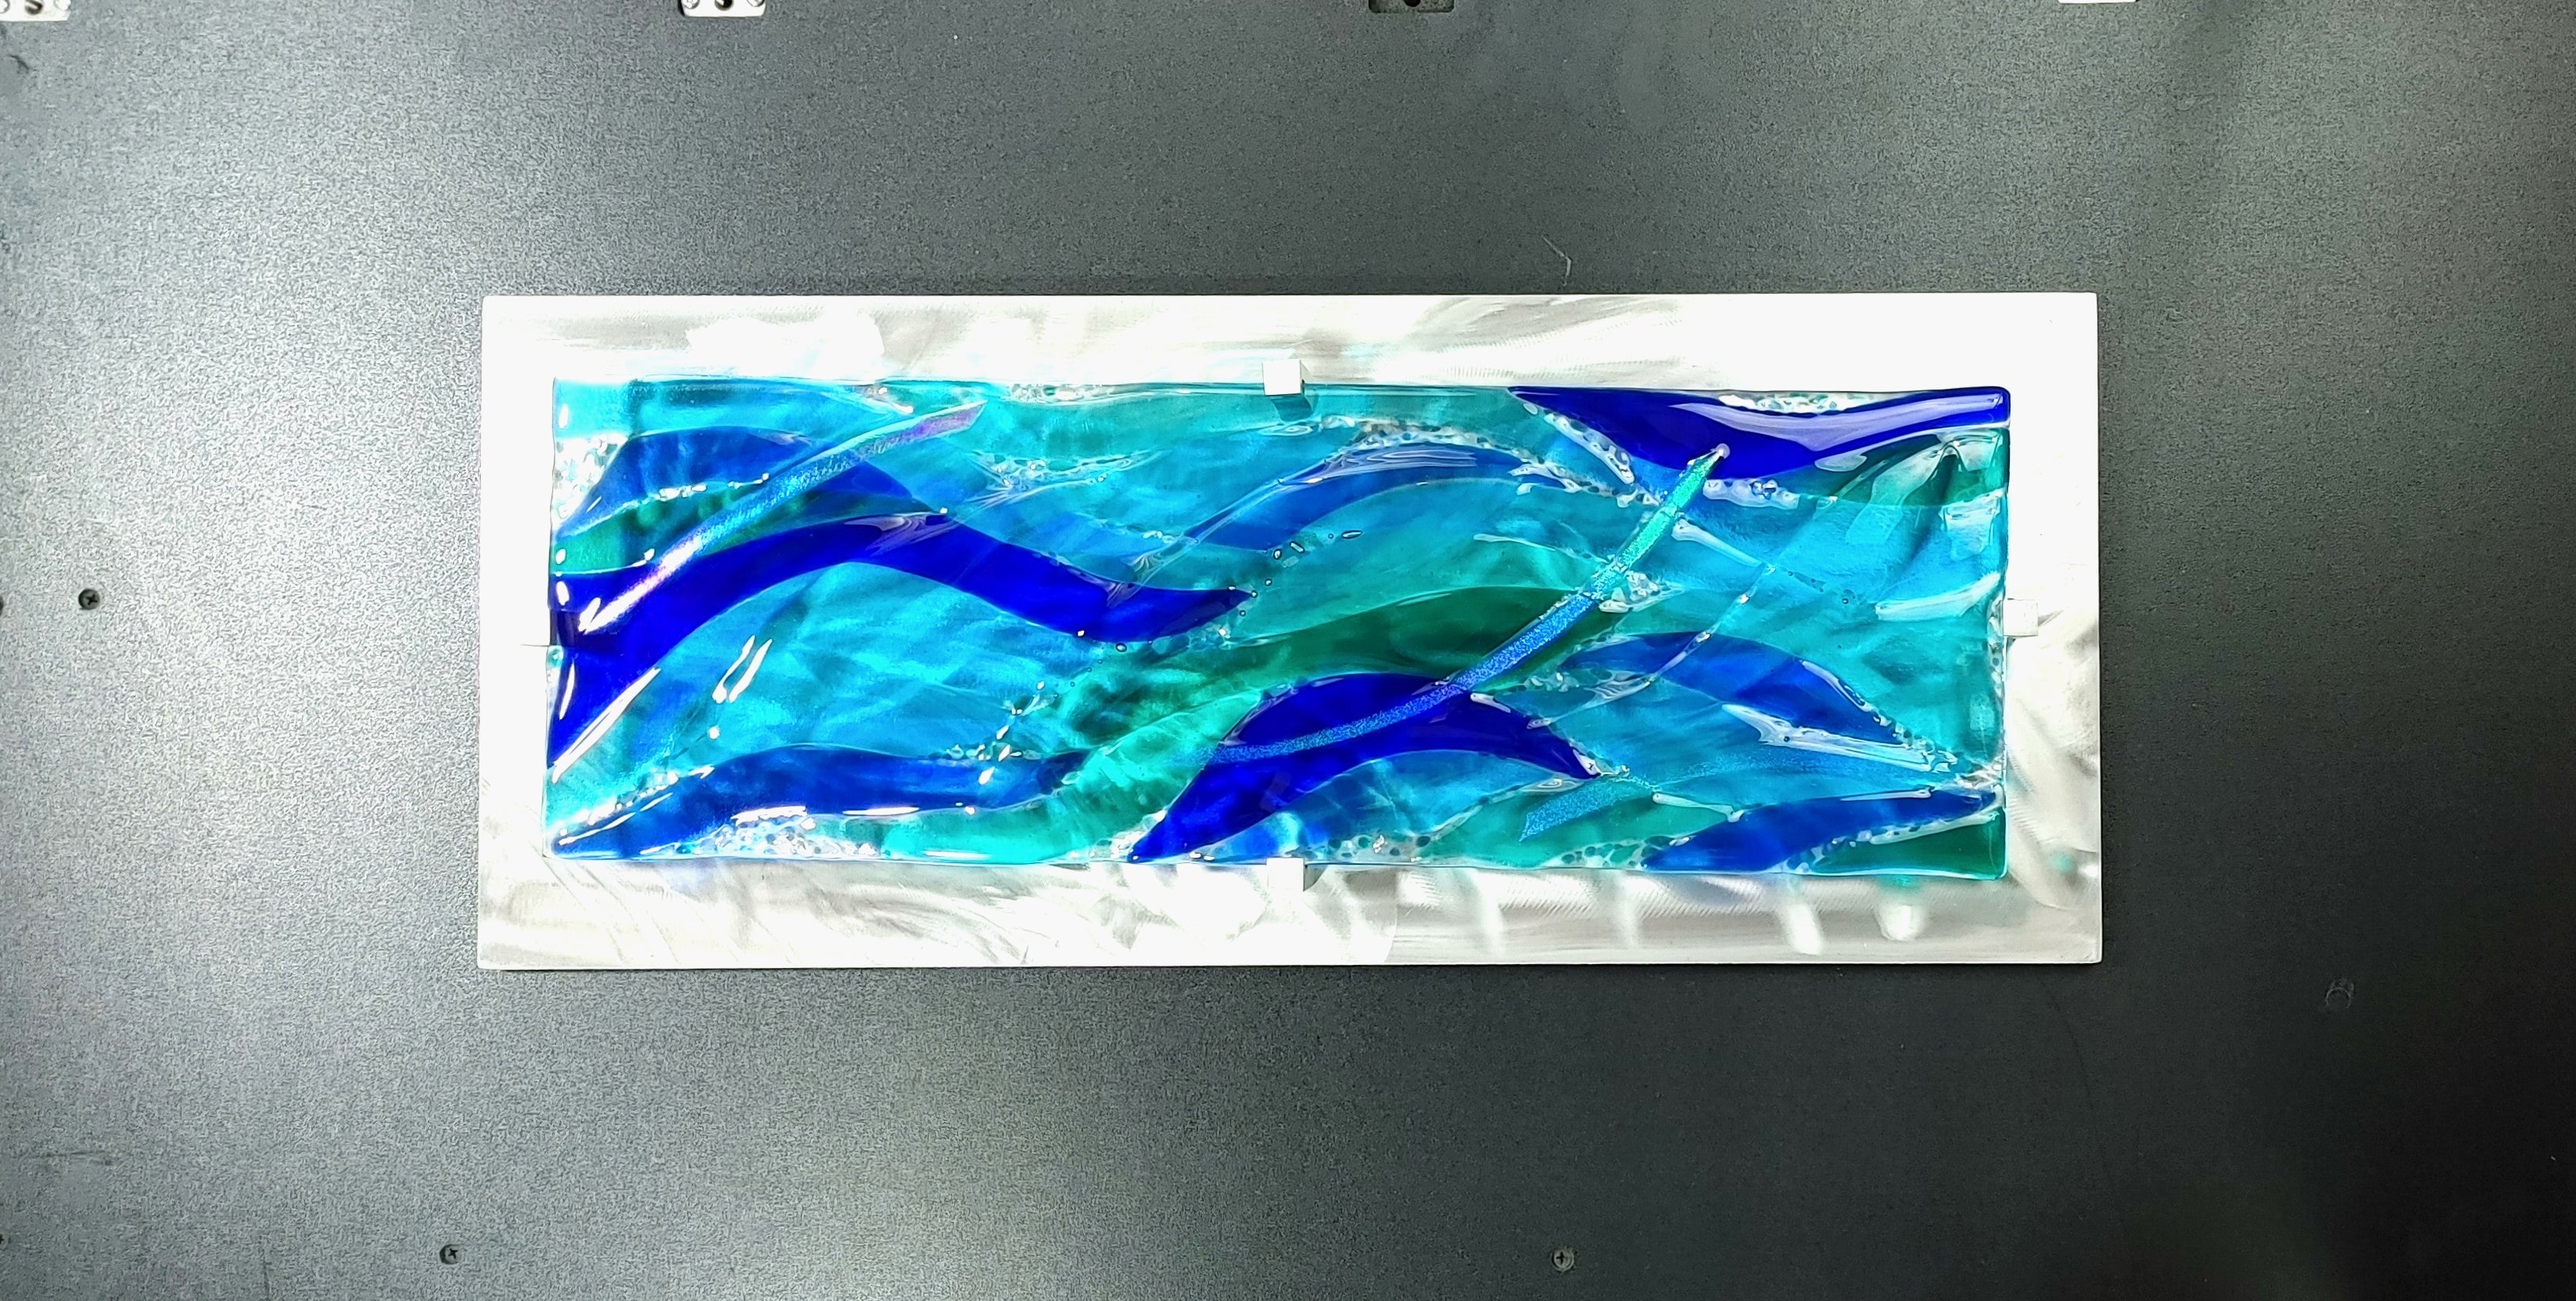 Metal and Glass Art Panel Fused Ocean Themed Stained Fused Glass. &quot;Water Ways&quot;